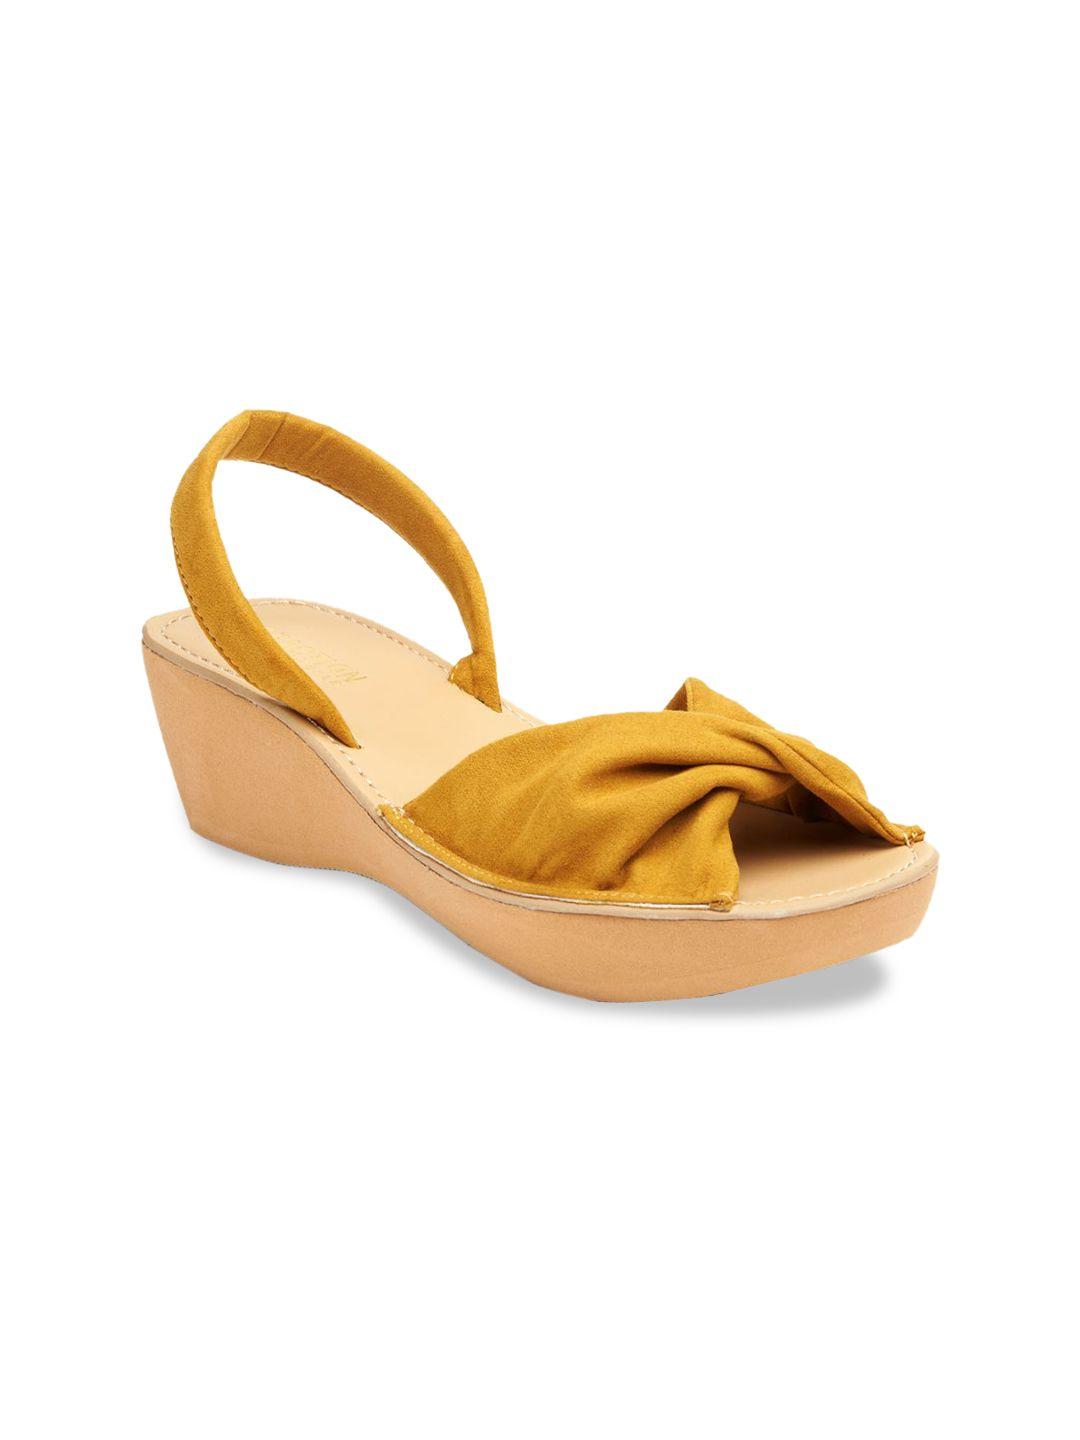 kenneth-cole-women-yellow-solid-heels